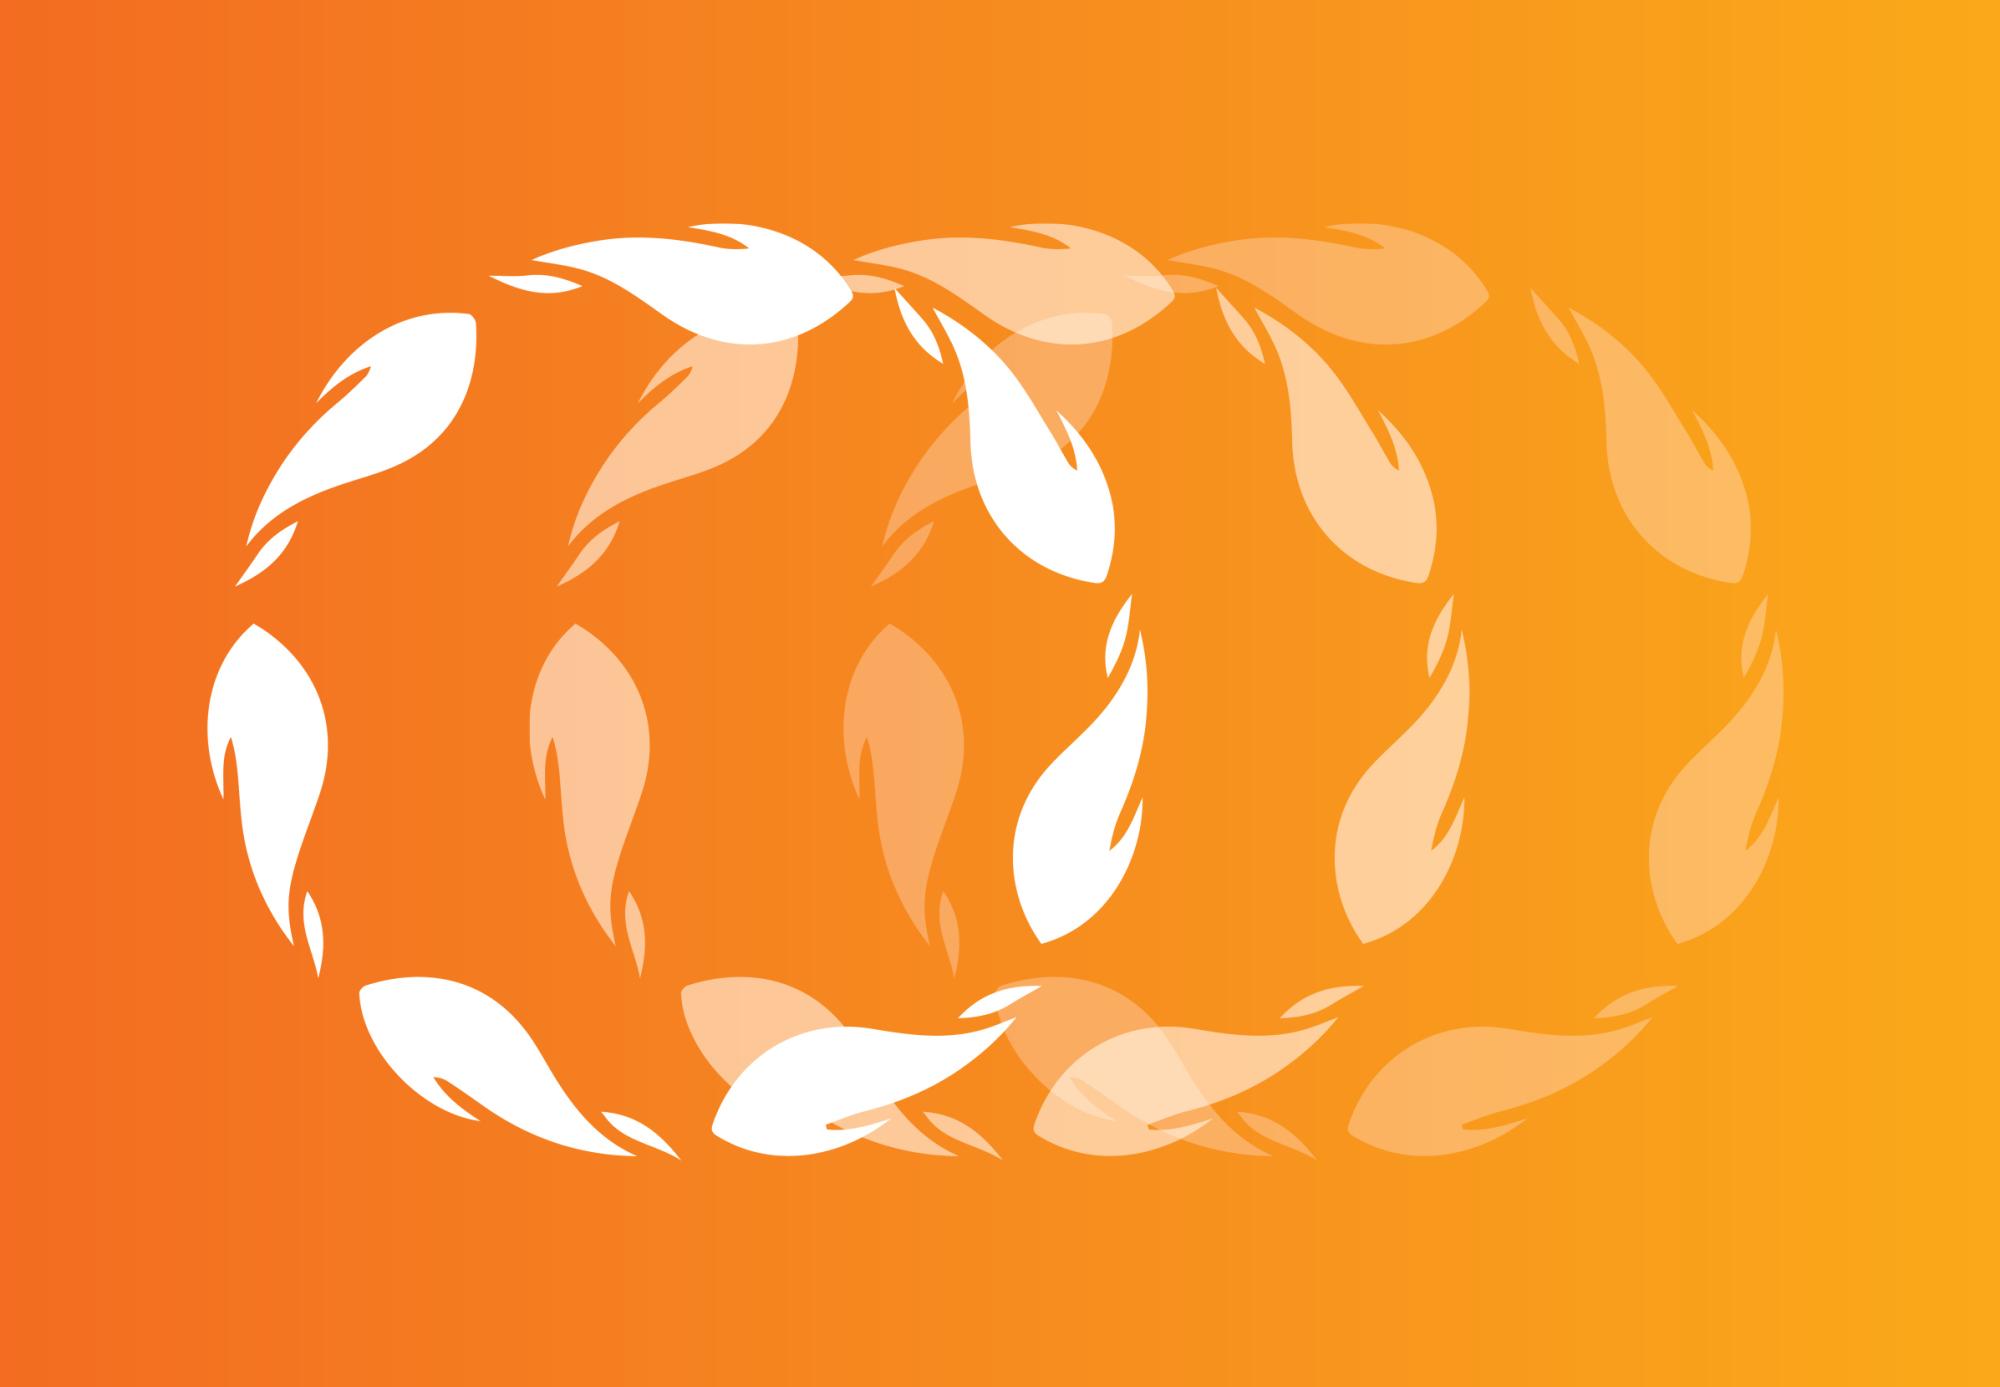 [ID: "TRC logo in white overlapping in various opacities on an orange ombre background."]